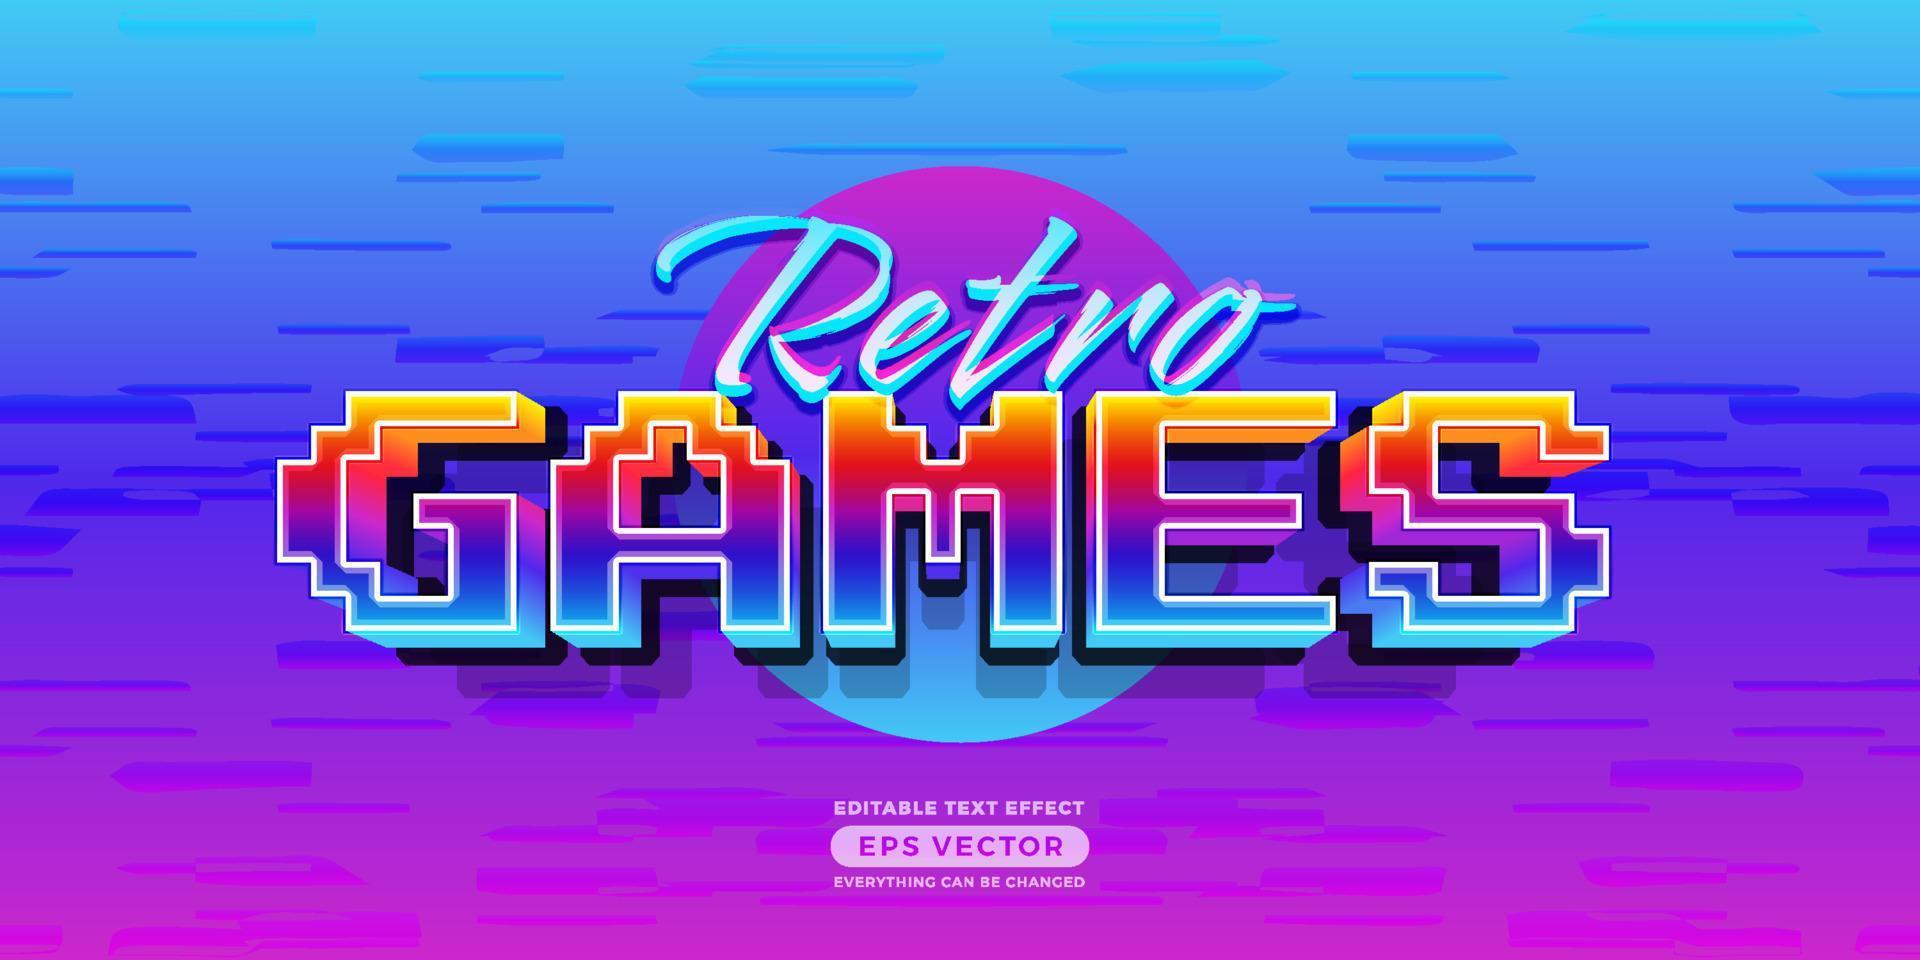 Retro Game Text Effect Style with vibrant theme realistic neon light concept for trendy flyer, social media, poster and banner template promotion vector